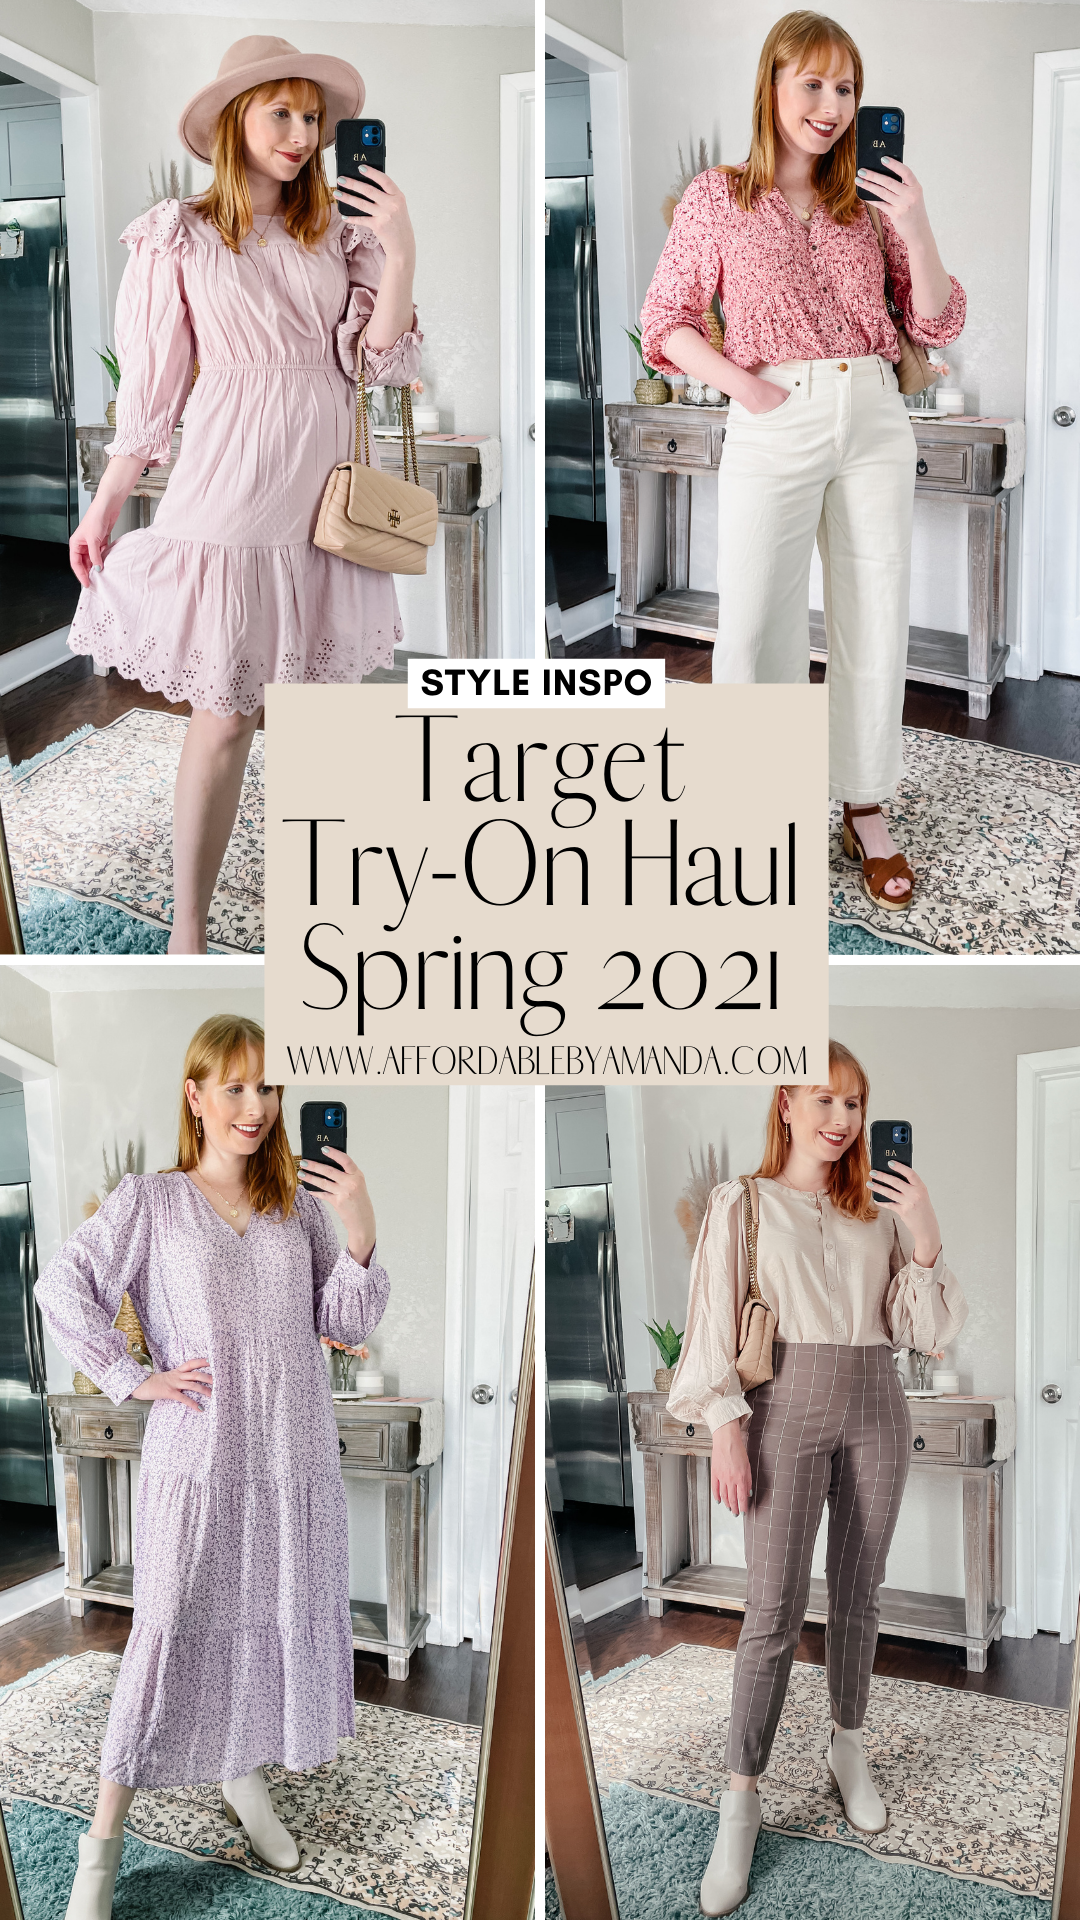 HAUL Affordable Winter to Spring Outfits